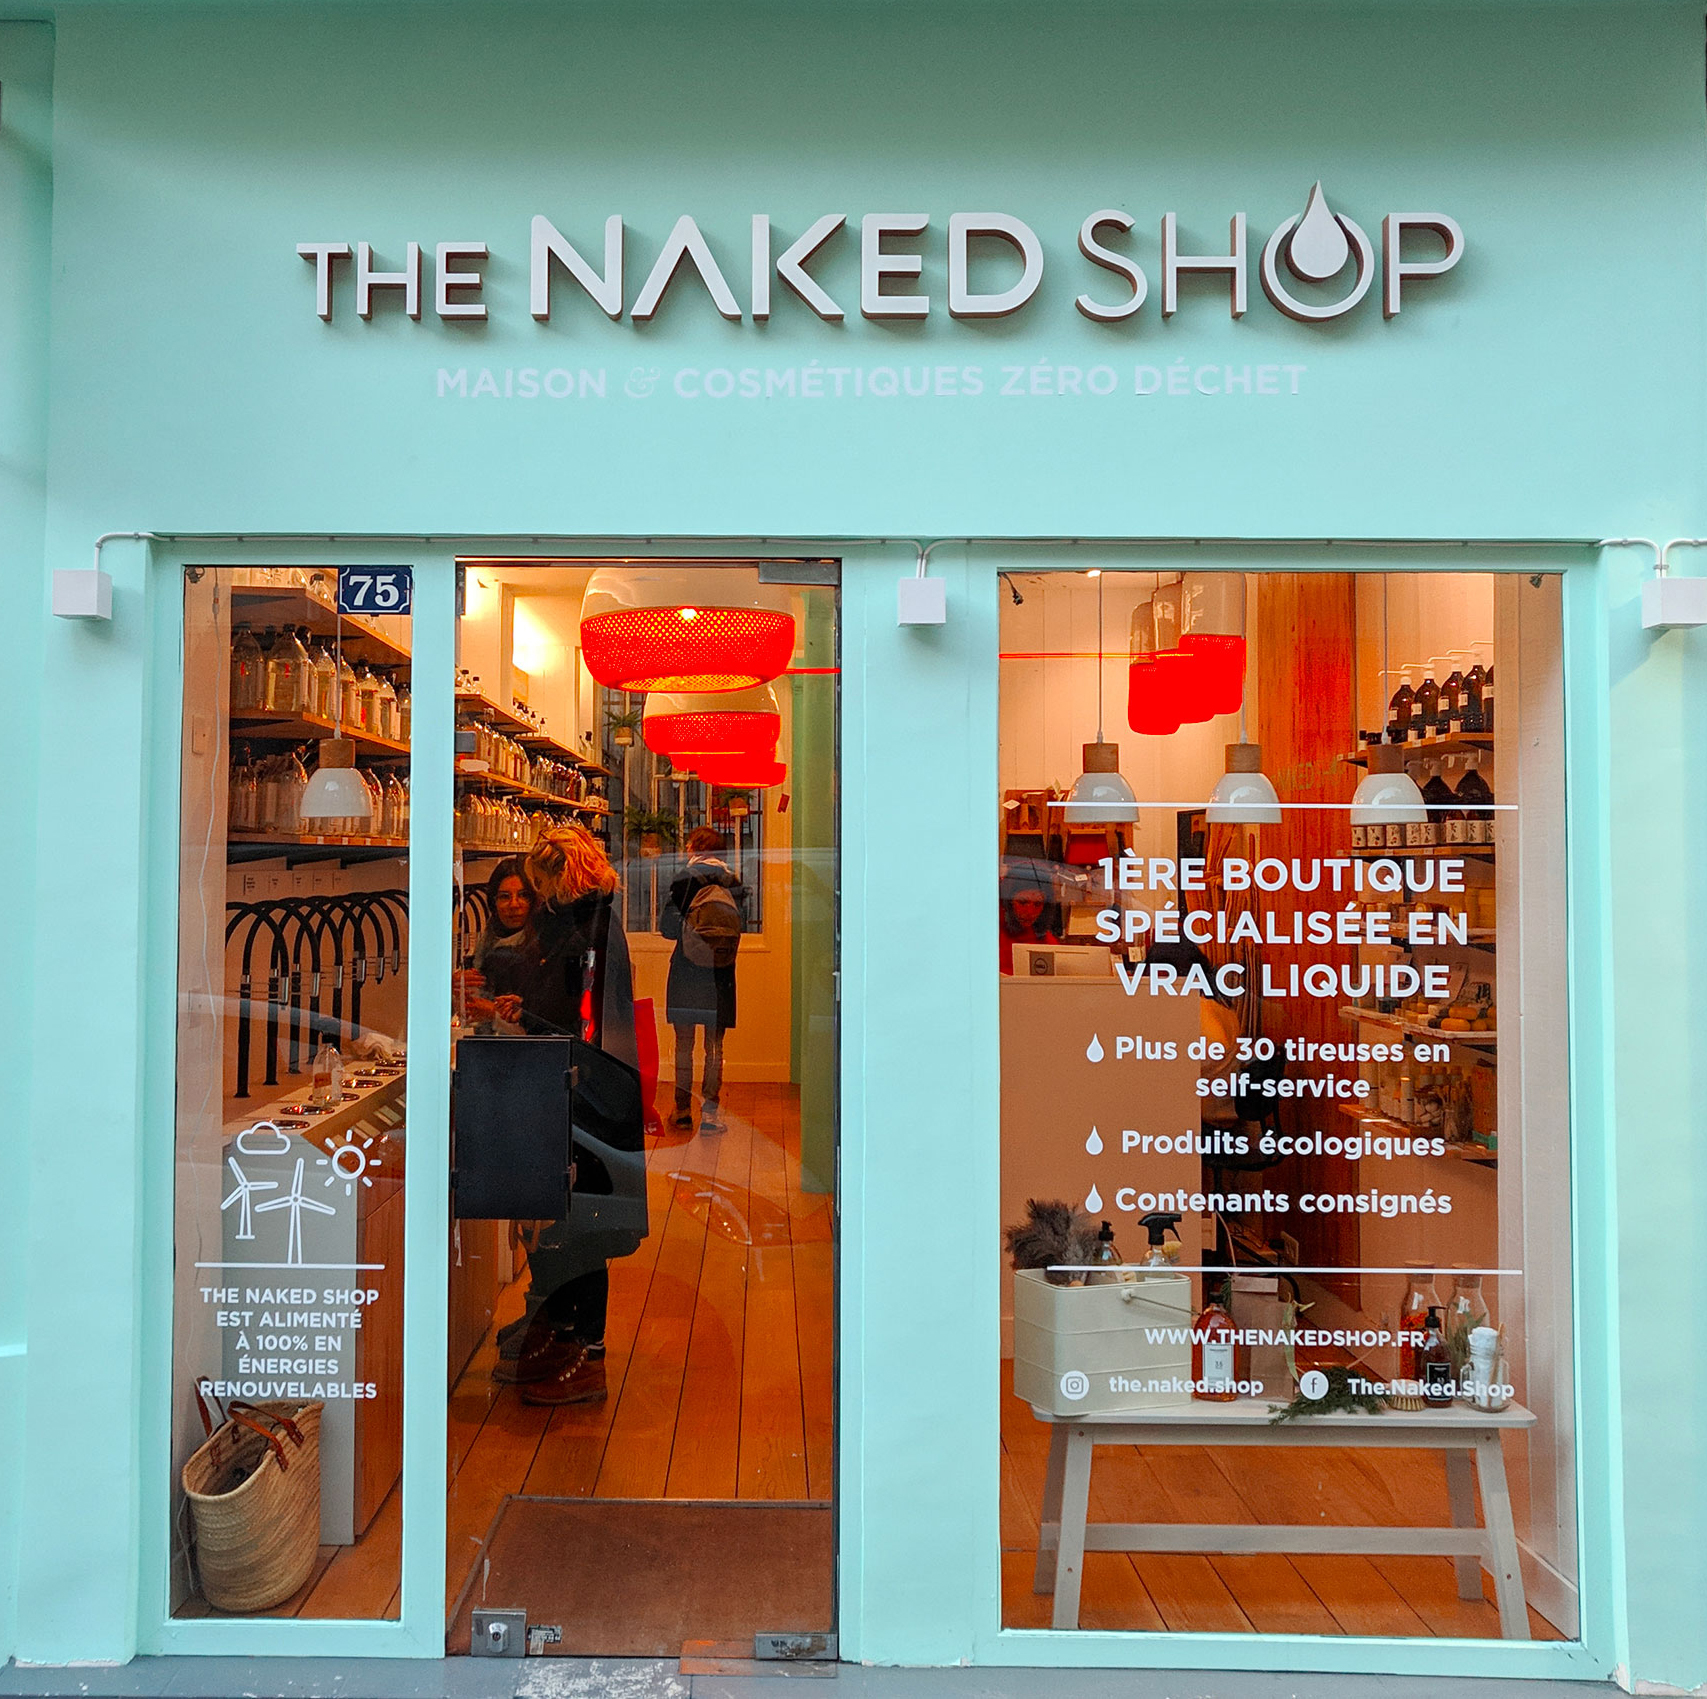 The naked shop